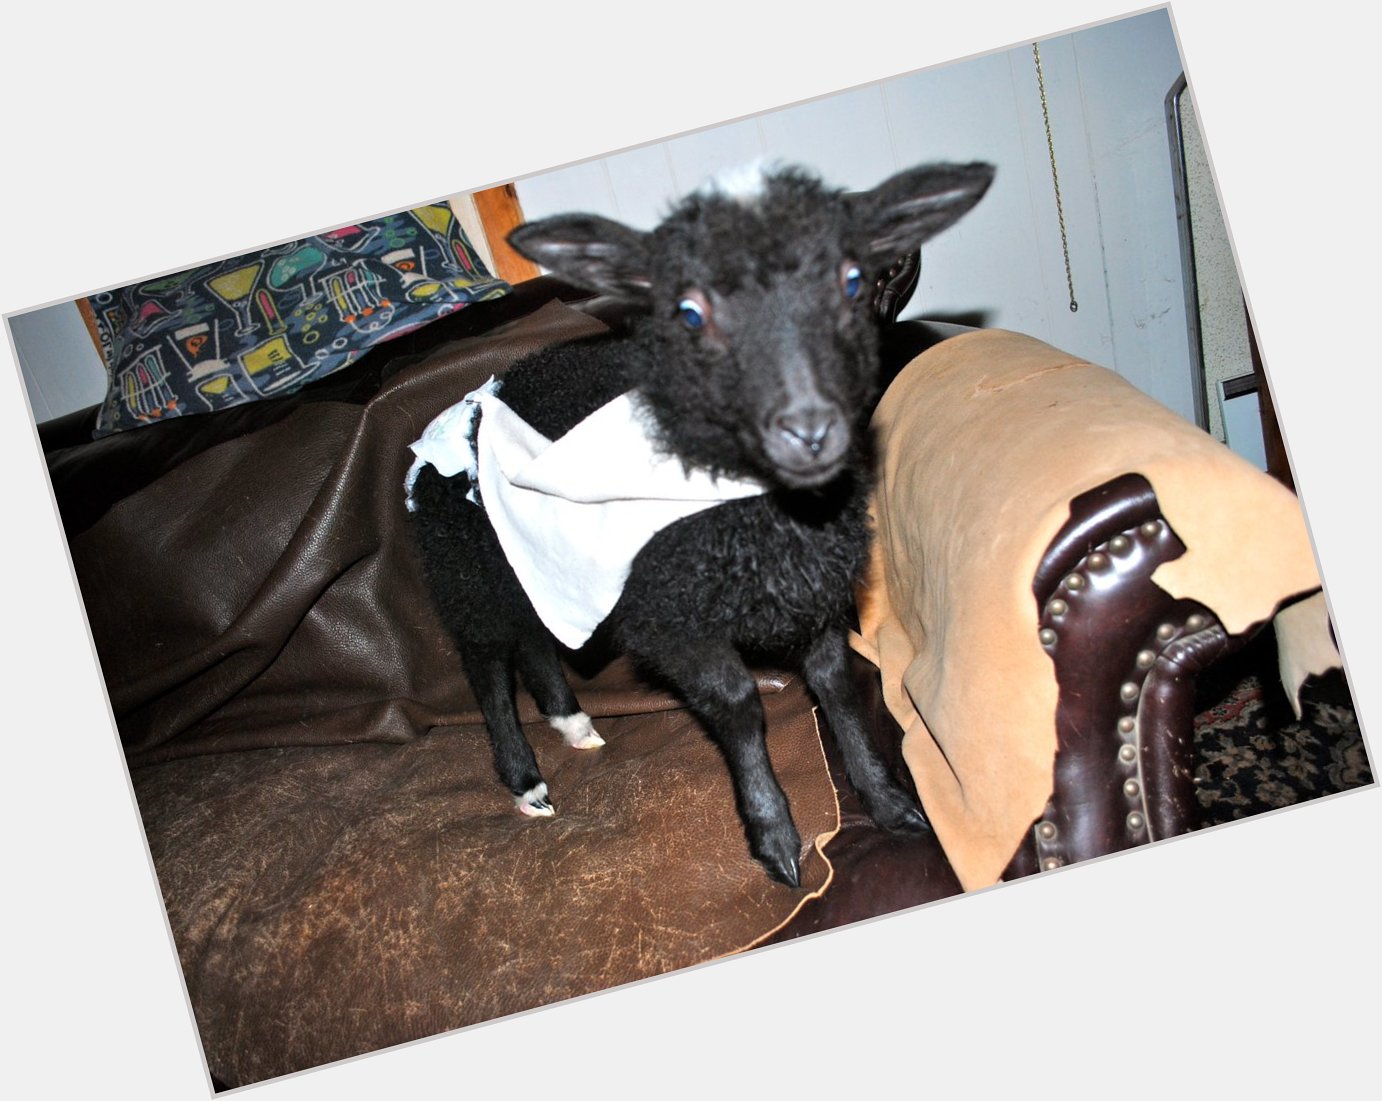  I\m sending you a lamb in underpants and split cape-style suspenders. Happy birthday! 